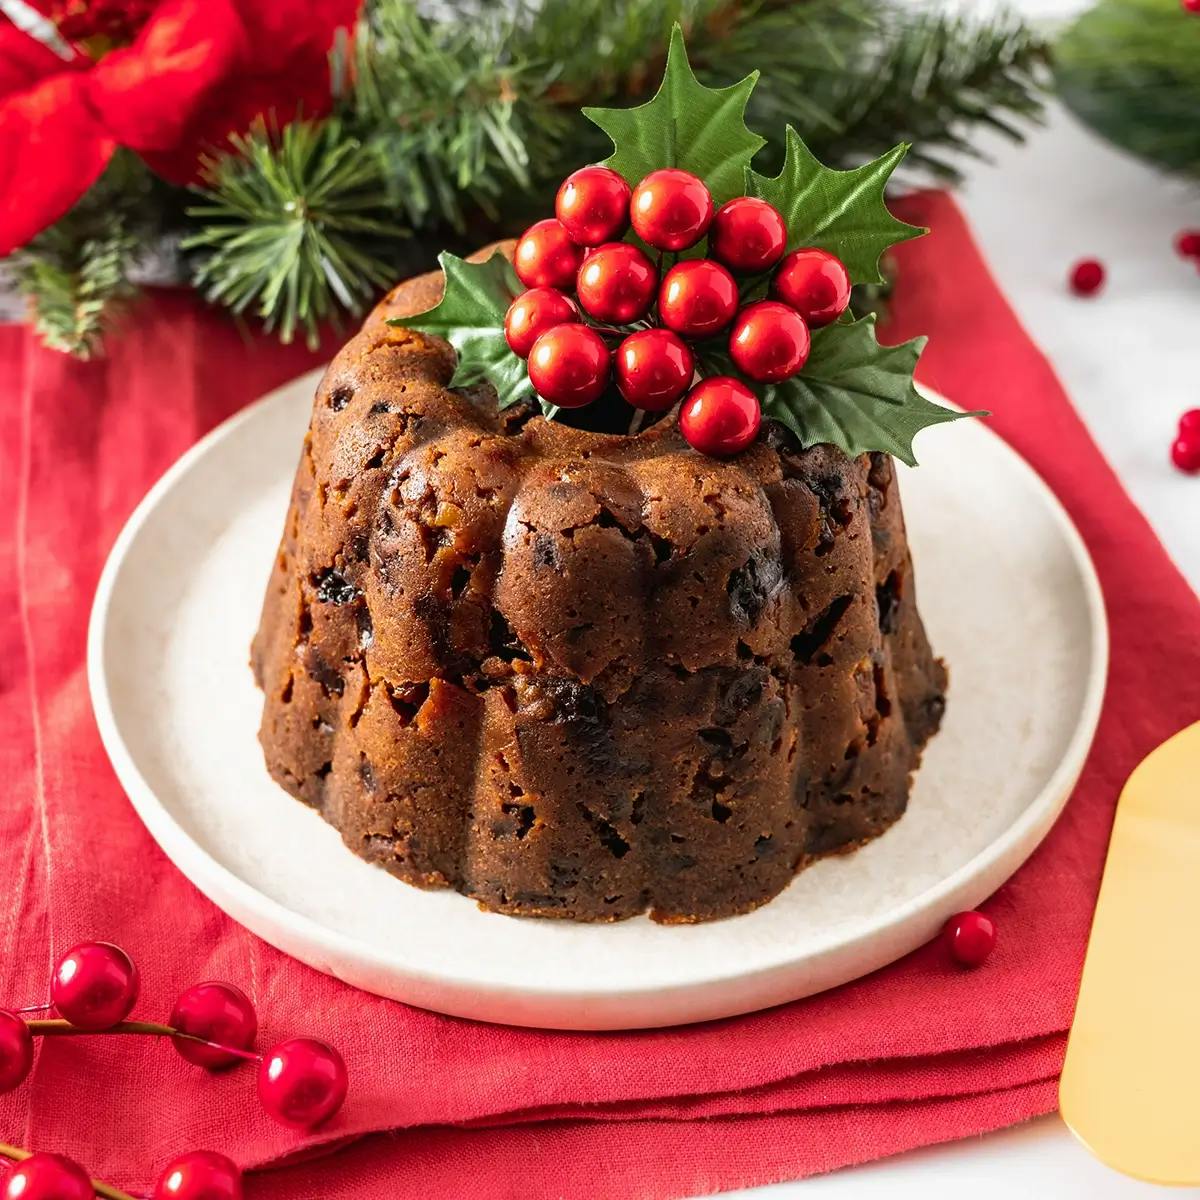 A traditional Christmas Plum Pudding on a plate, with a sprig of holly on the top.